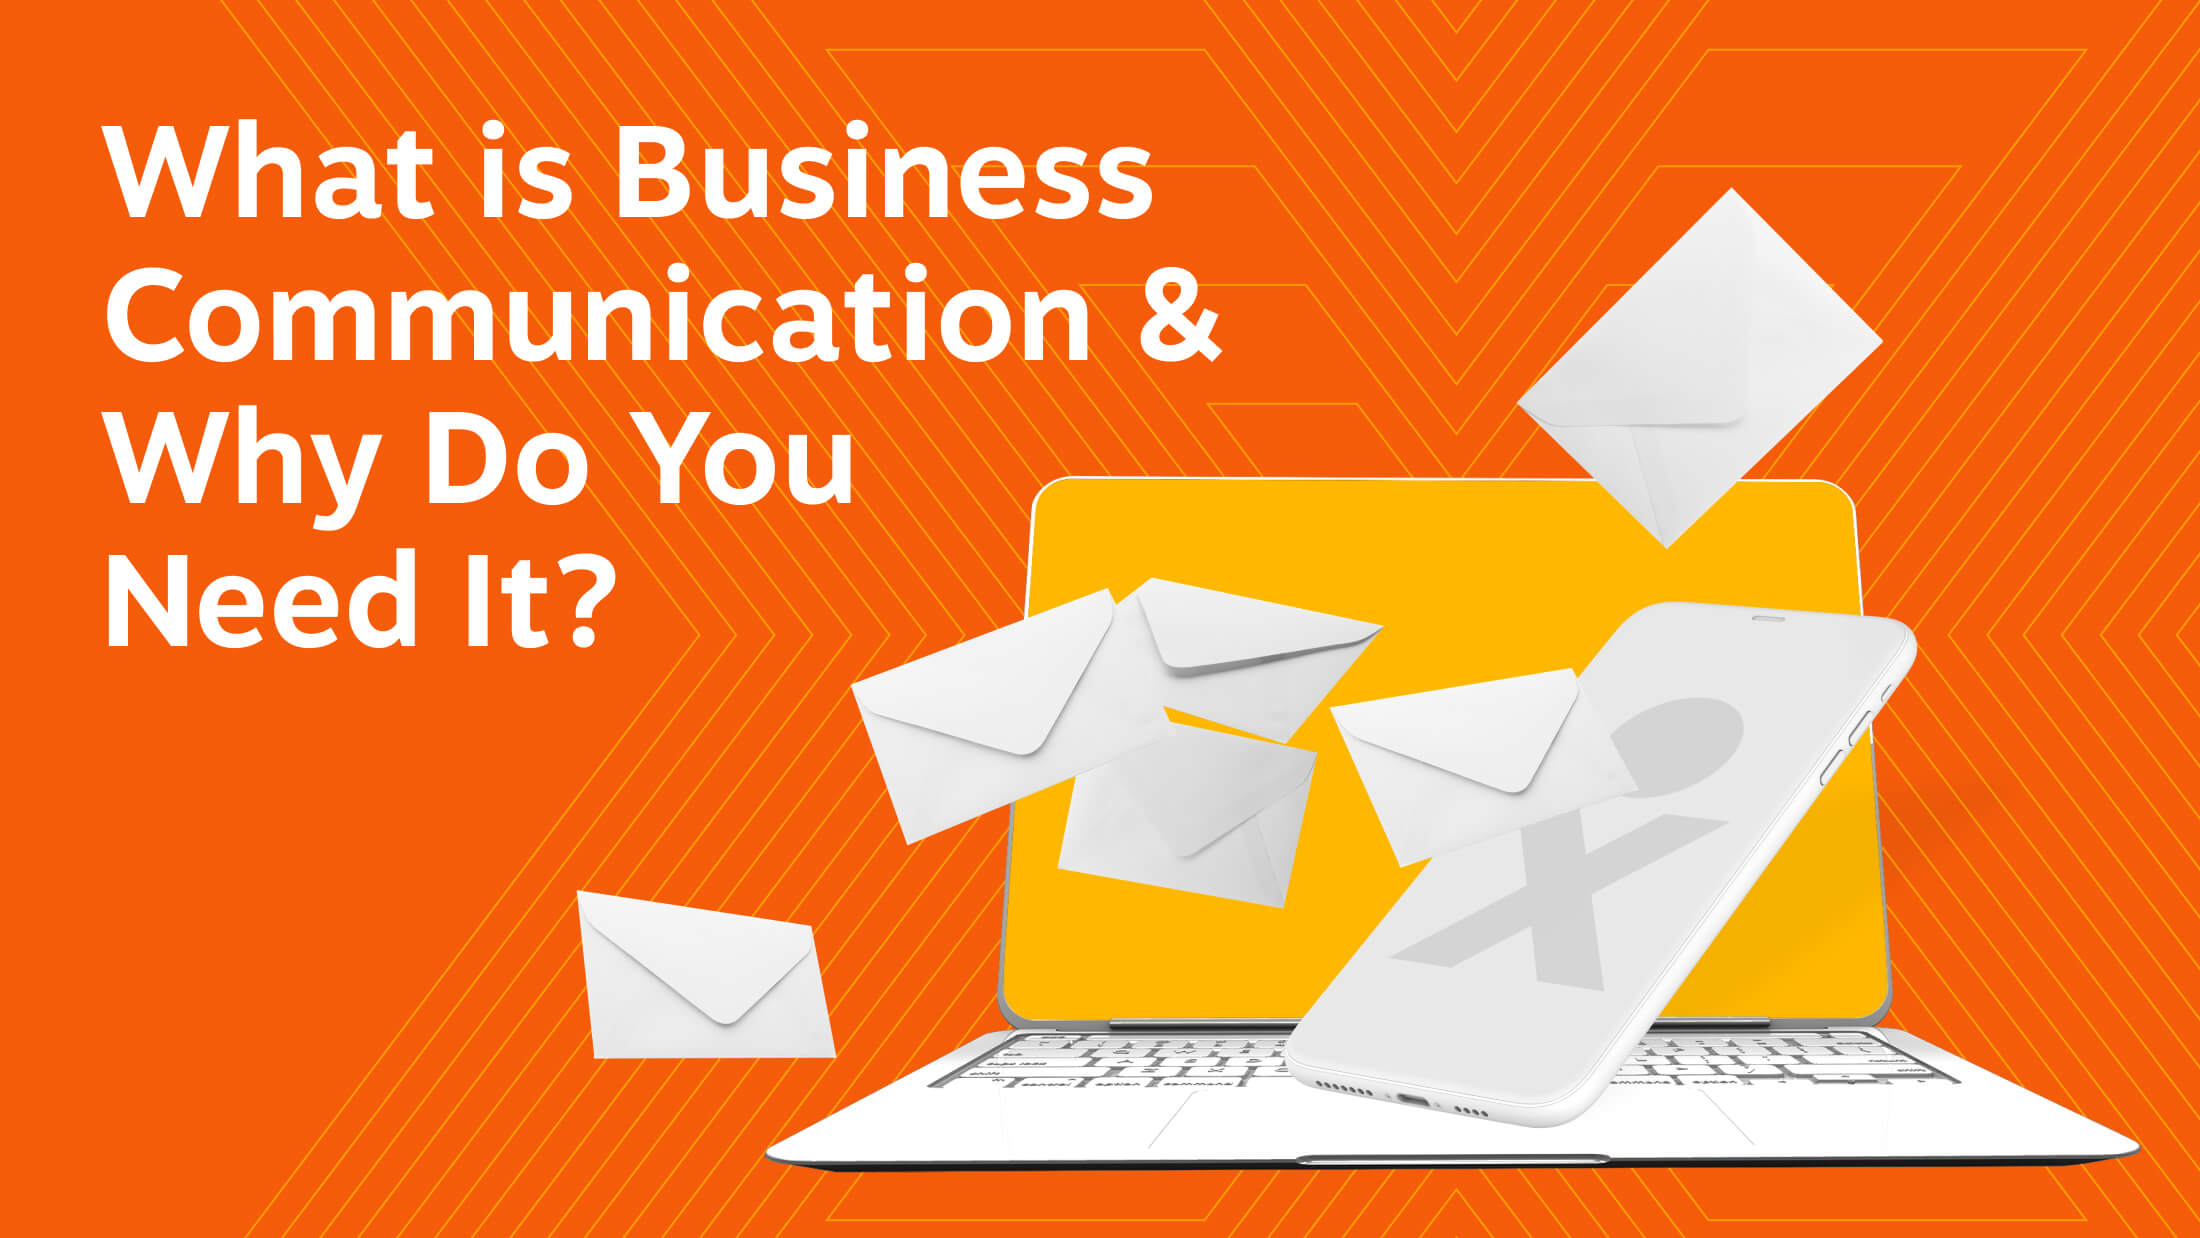 What is Business Communication?